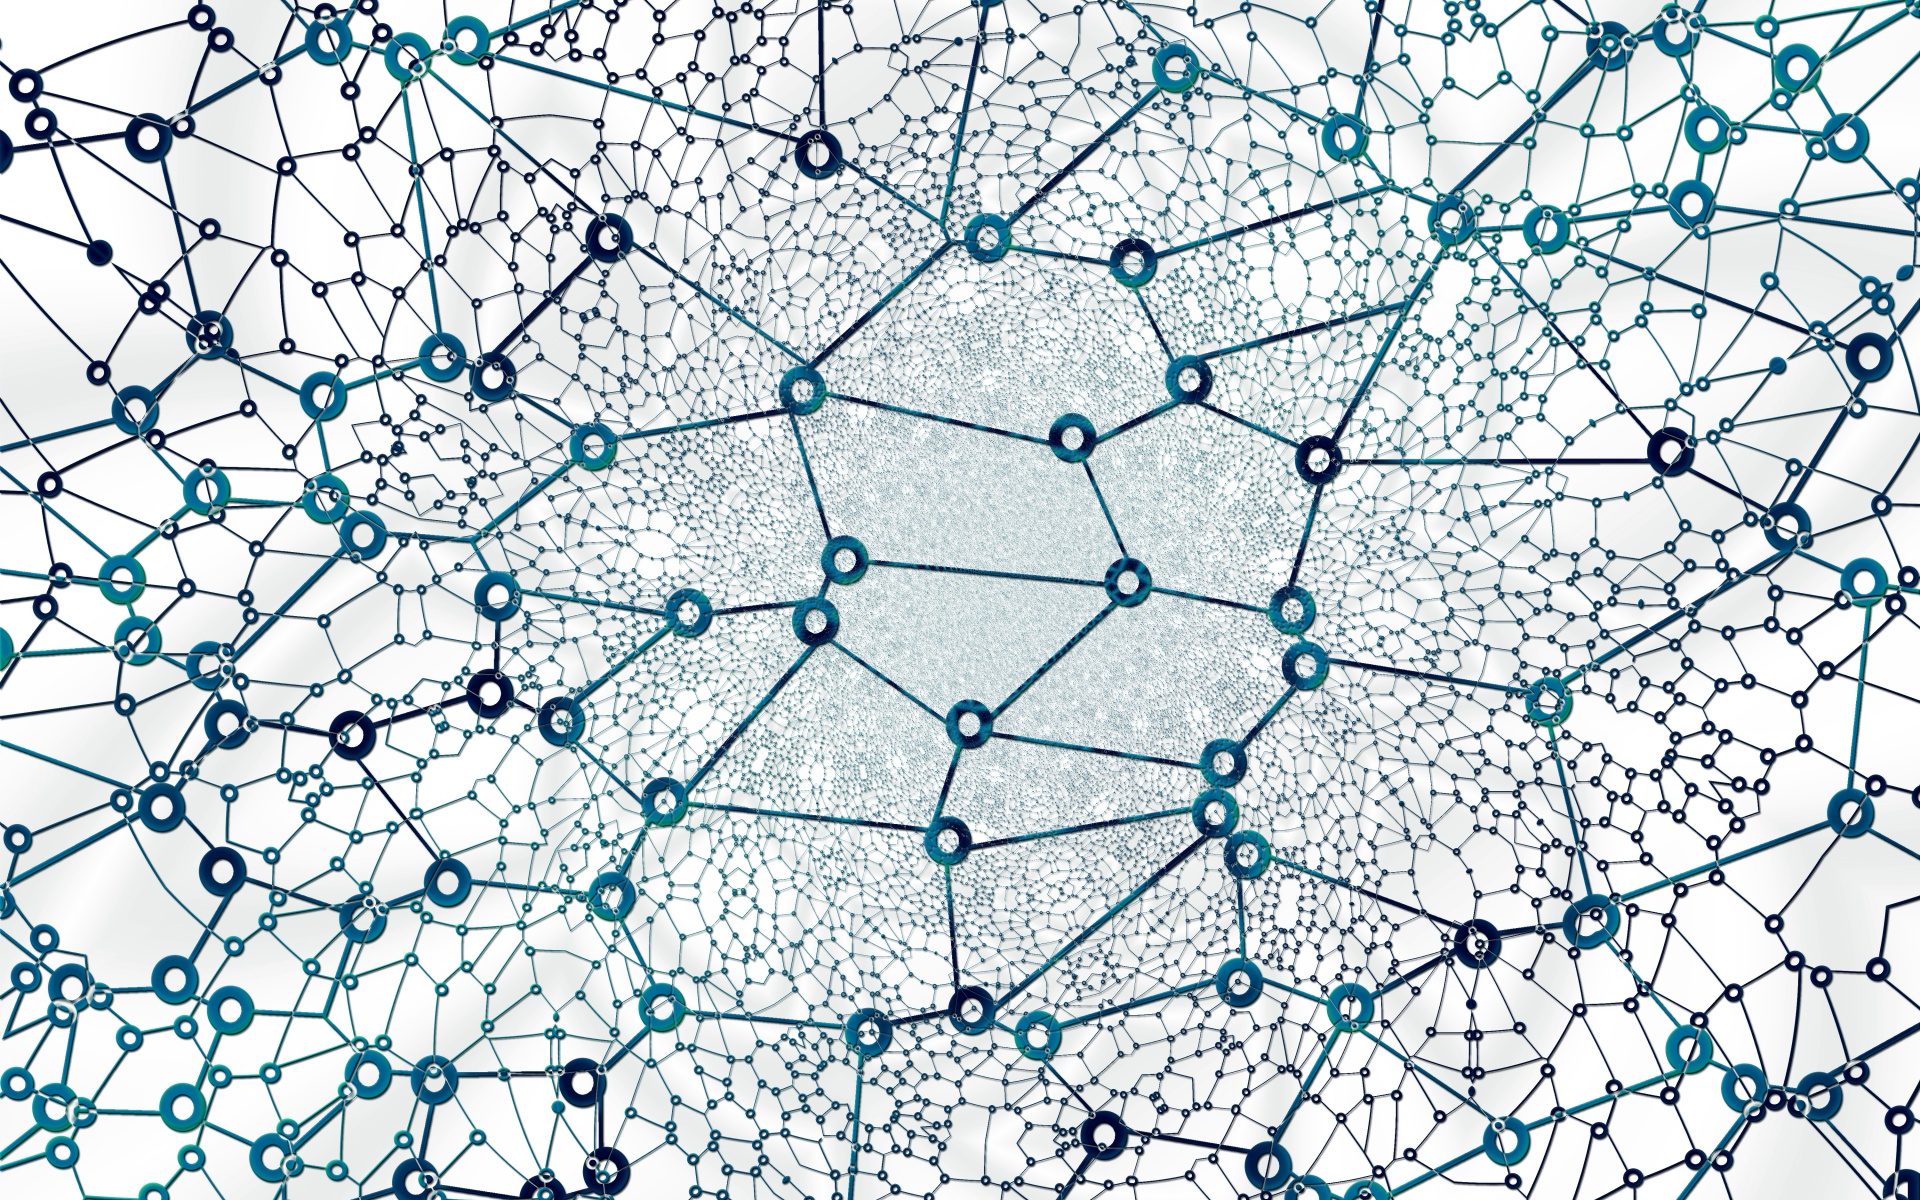 Drawing of a large network